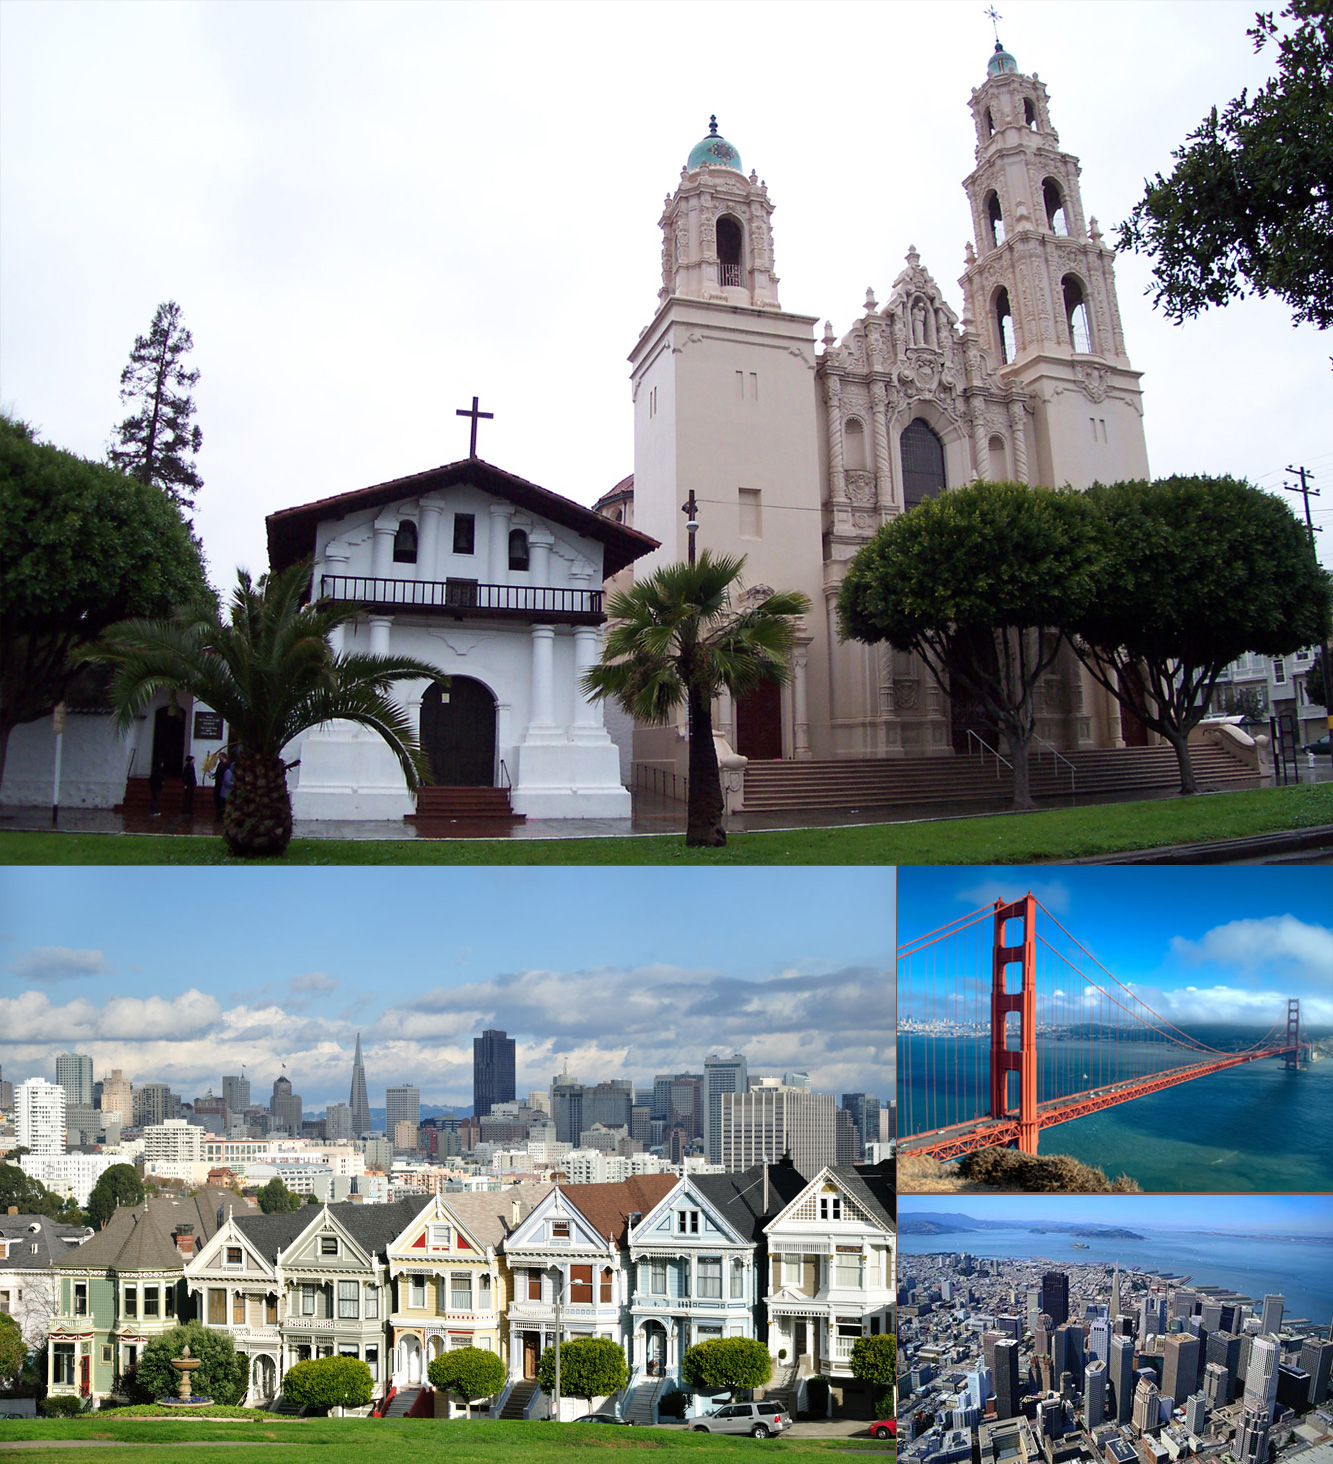 Father Francisco Palou founds Mission San Francisco de Asis in what is now San Francisco, California